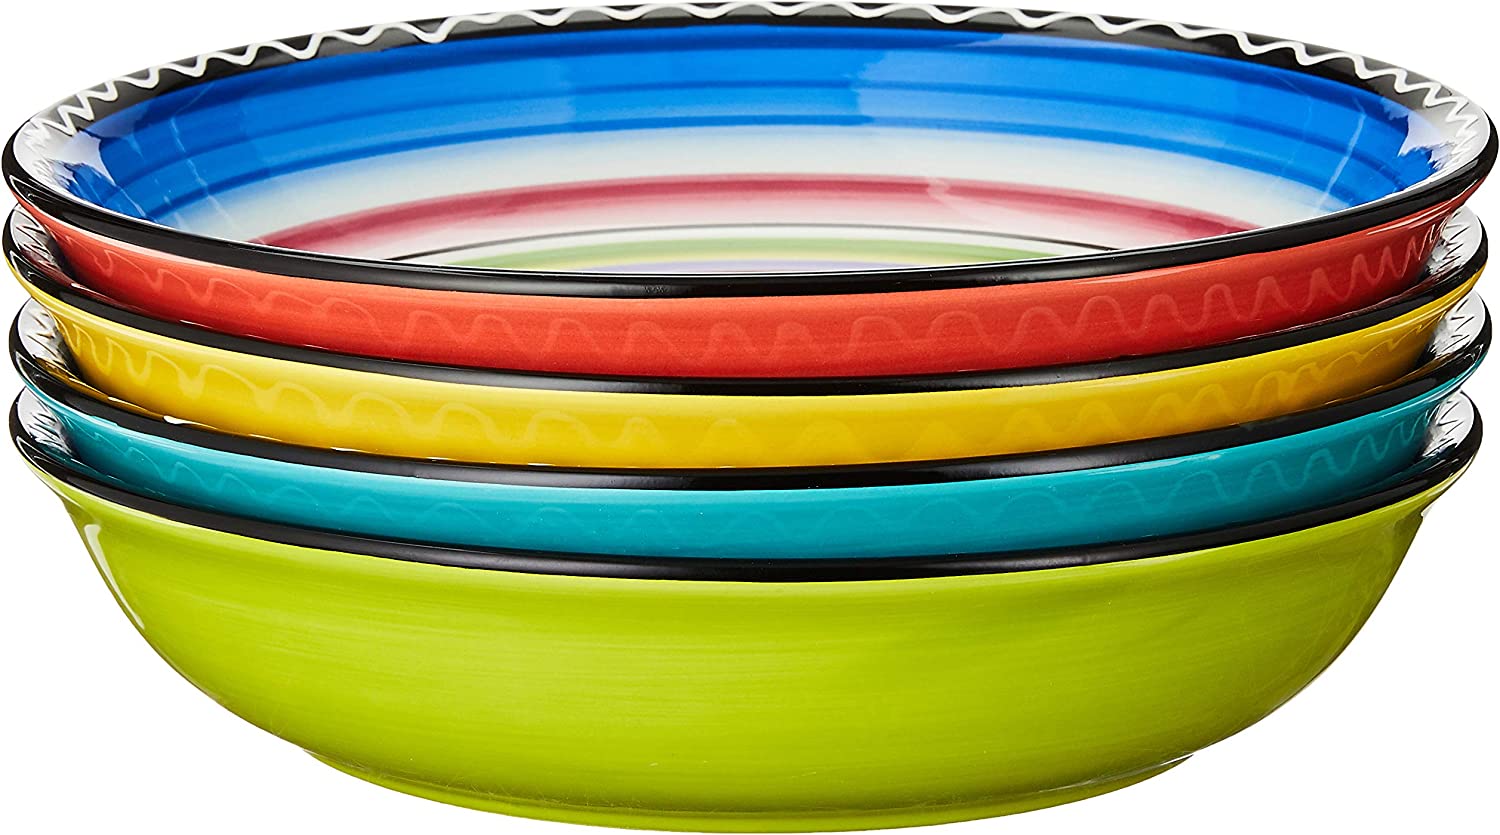 Certified International Tequila Sunrise Hand Painted Soup Bowls, 4-Pack